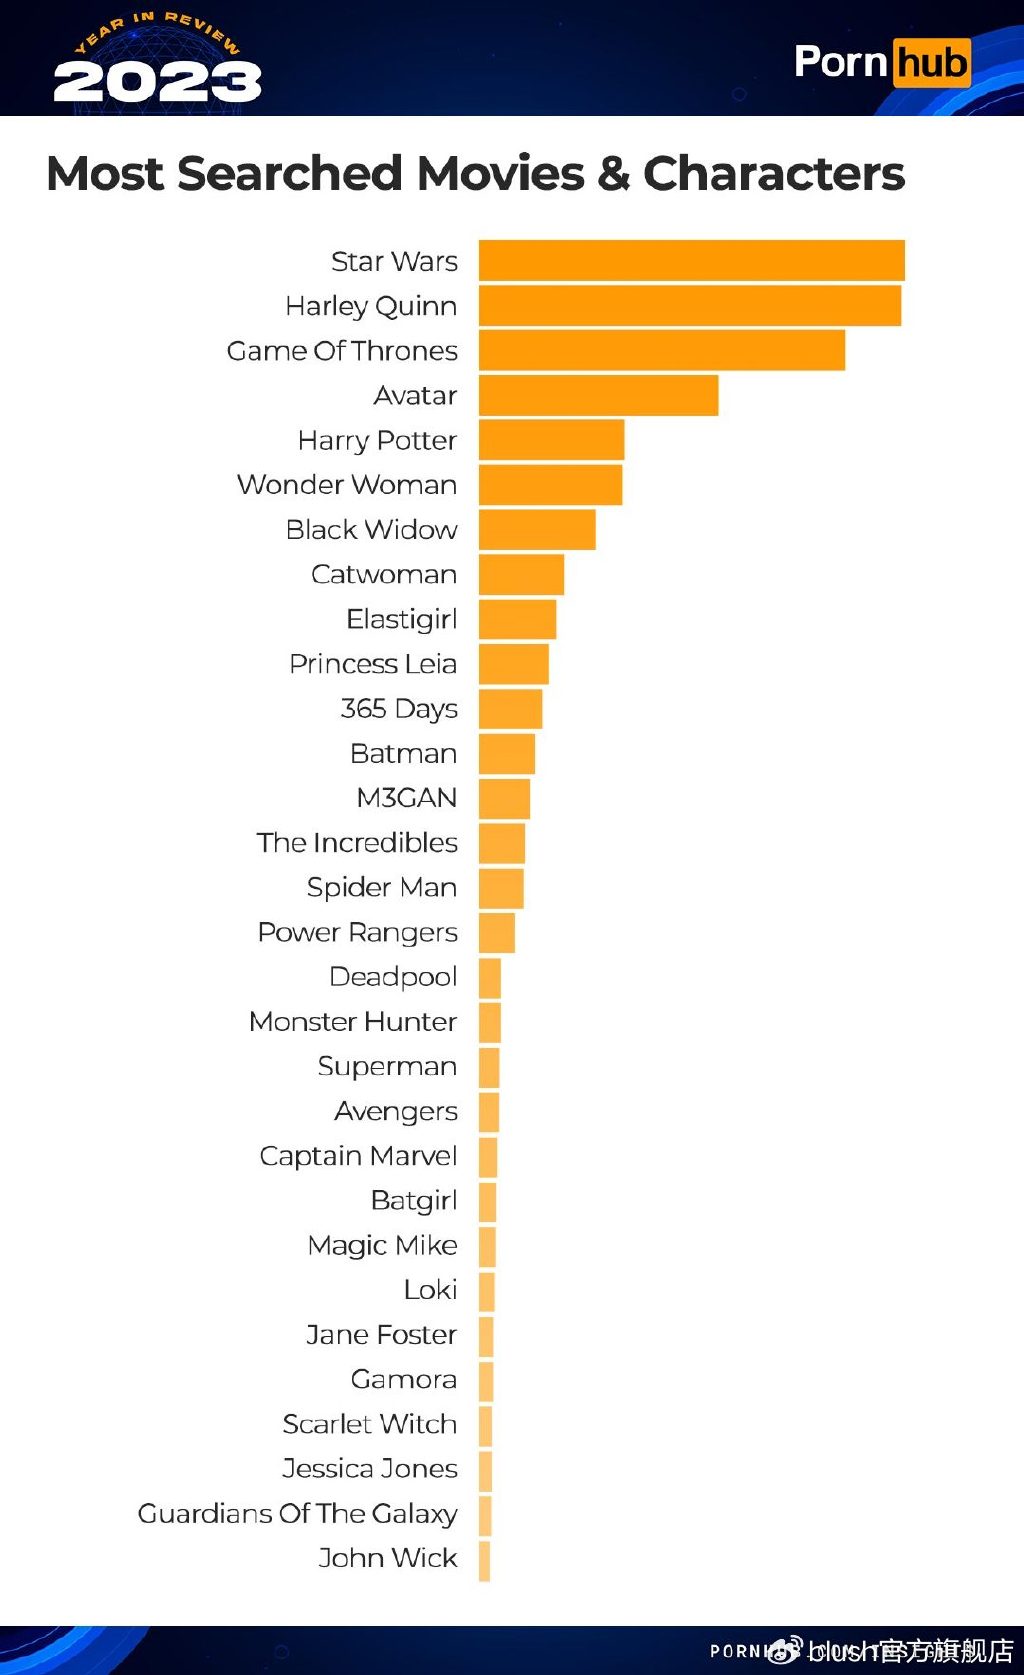 pornhub-insights-2023-year-in-review-most-searched-movies-characters.jpg